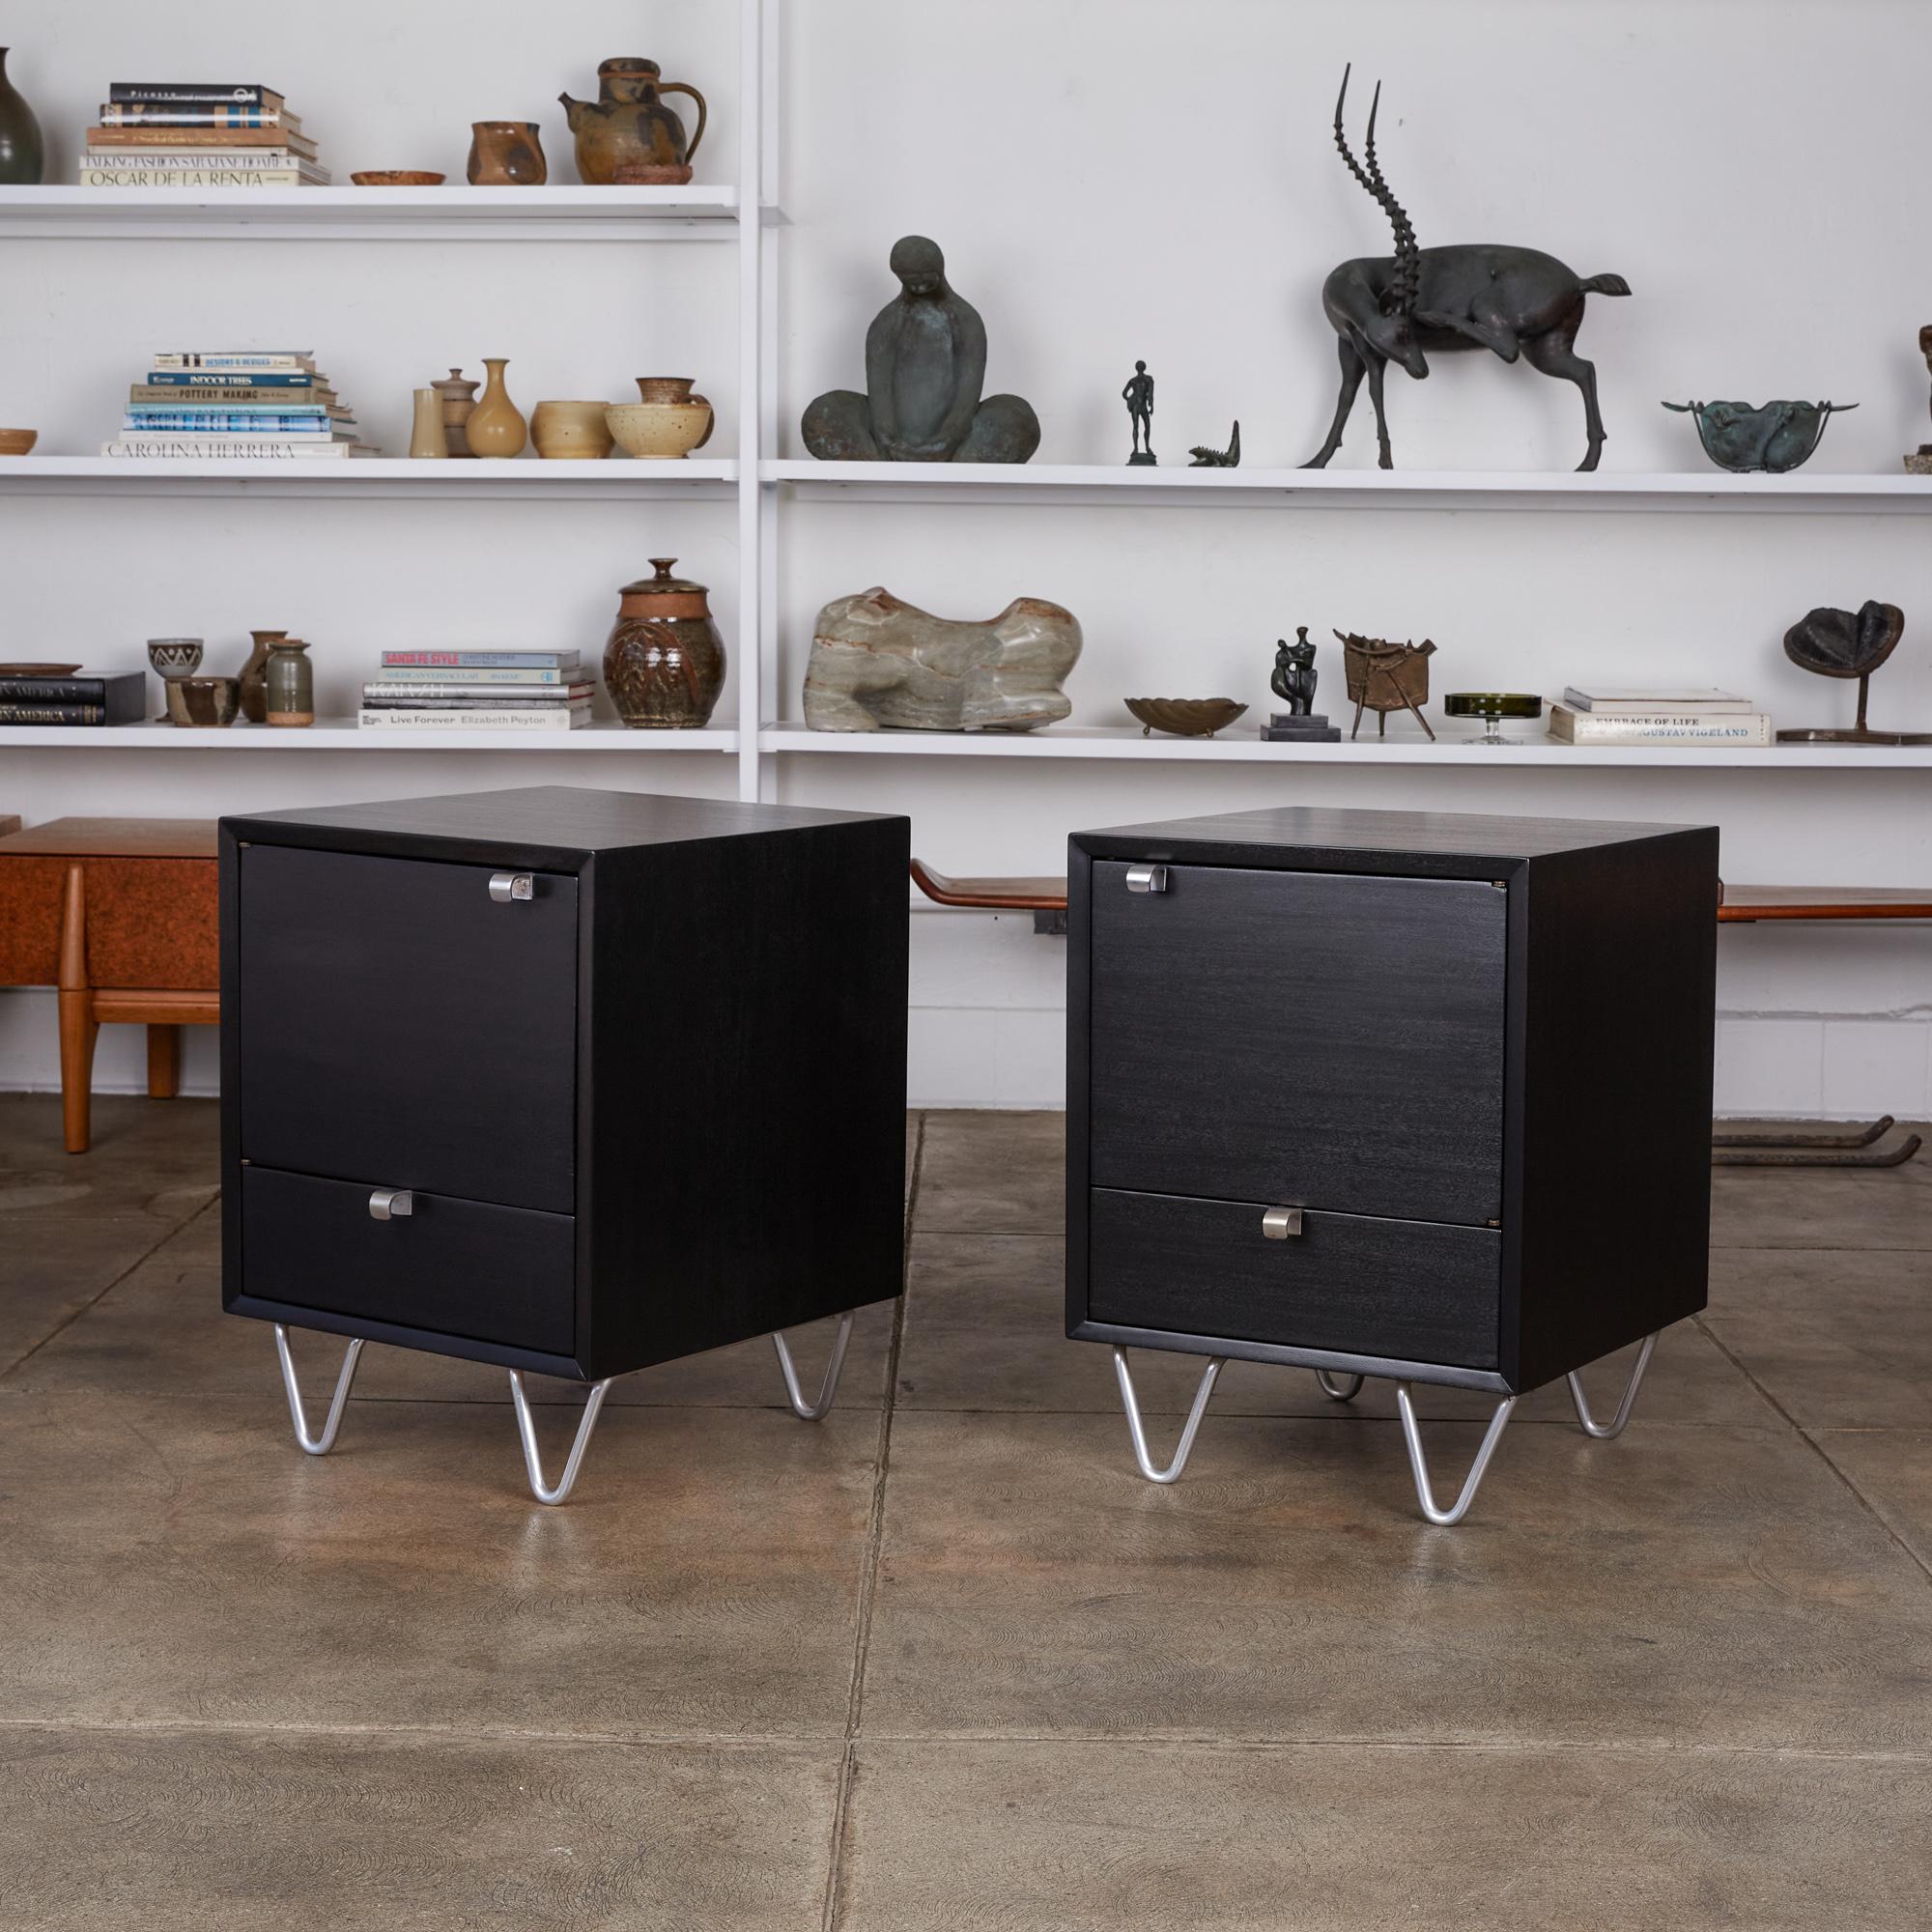 Mid-Century Modern Pair of Nightstands by George Nelson for Herman Miller